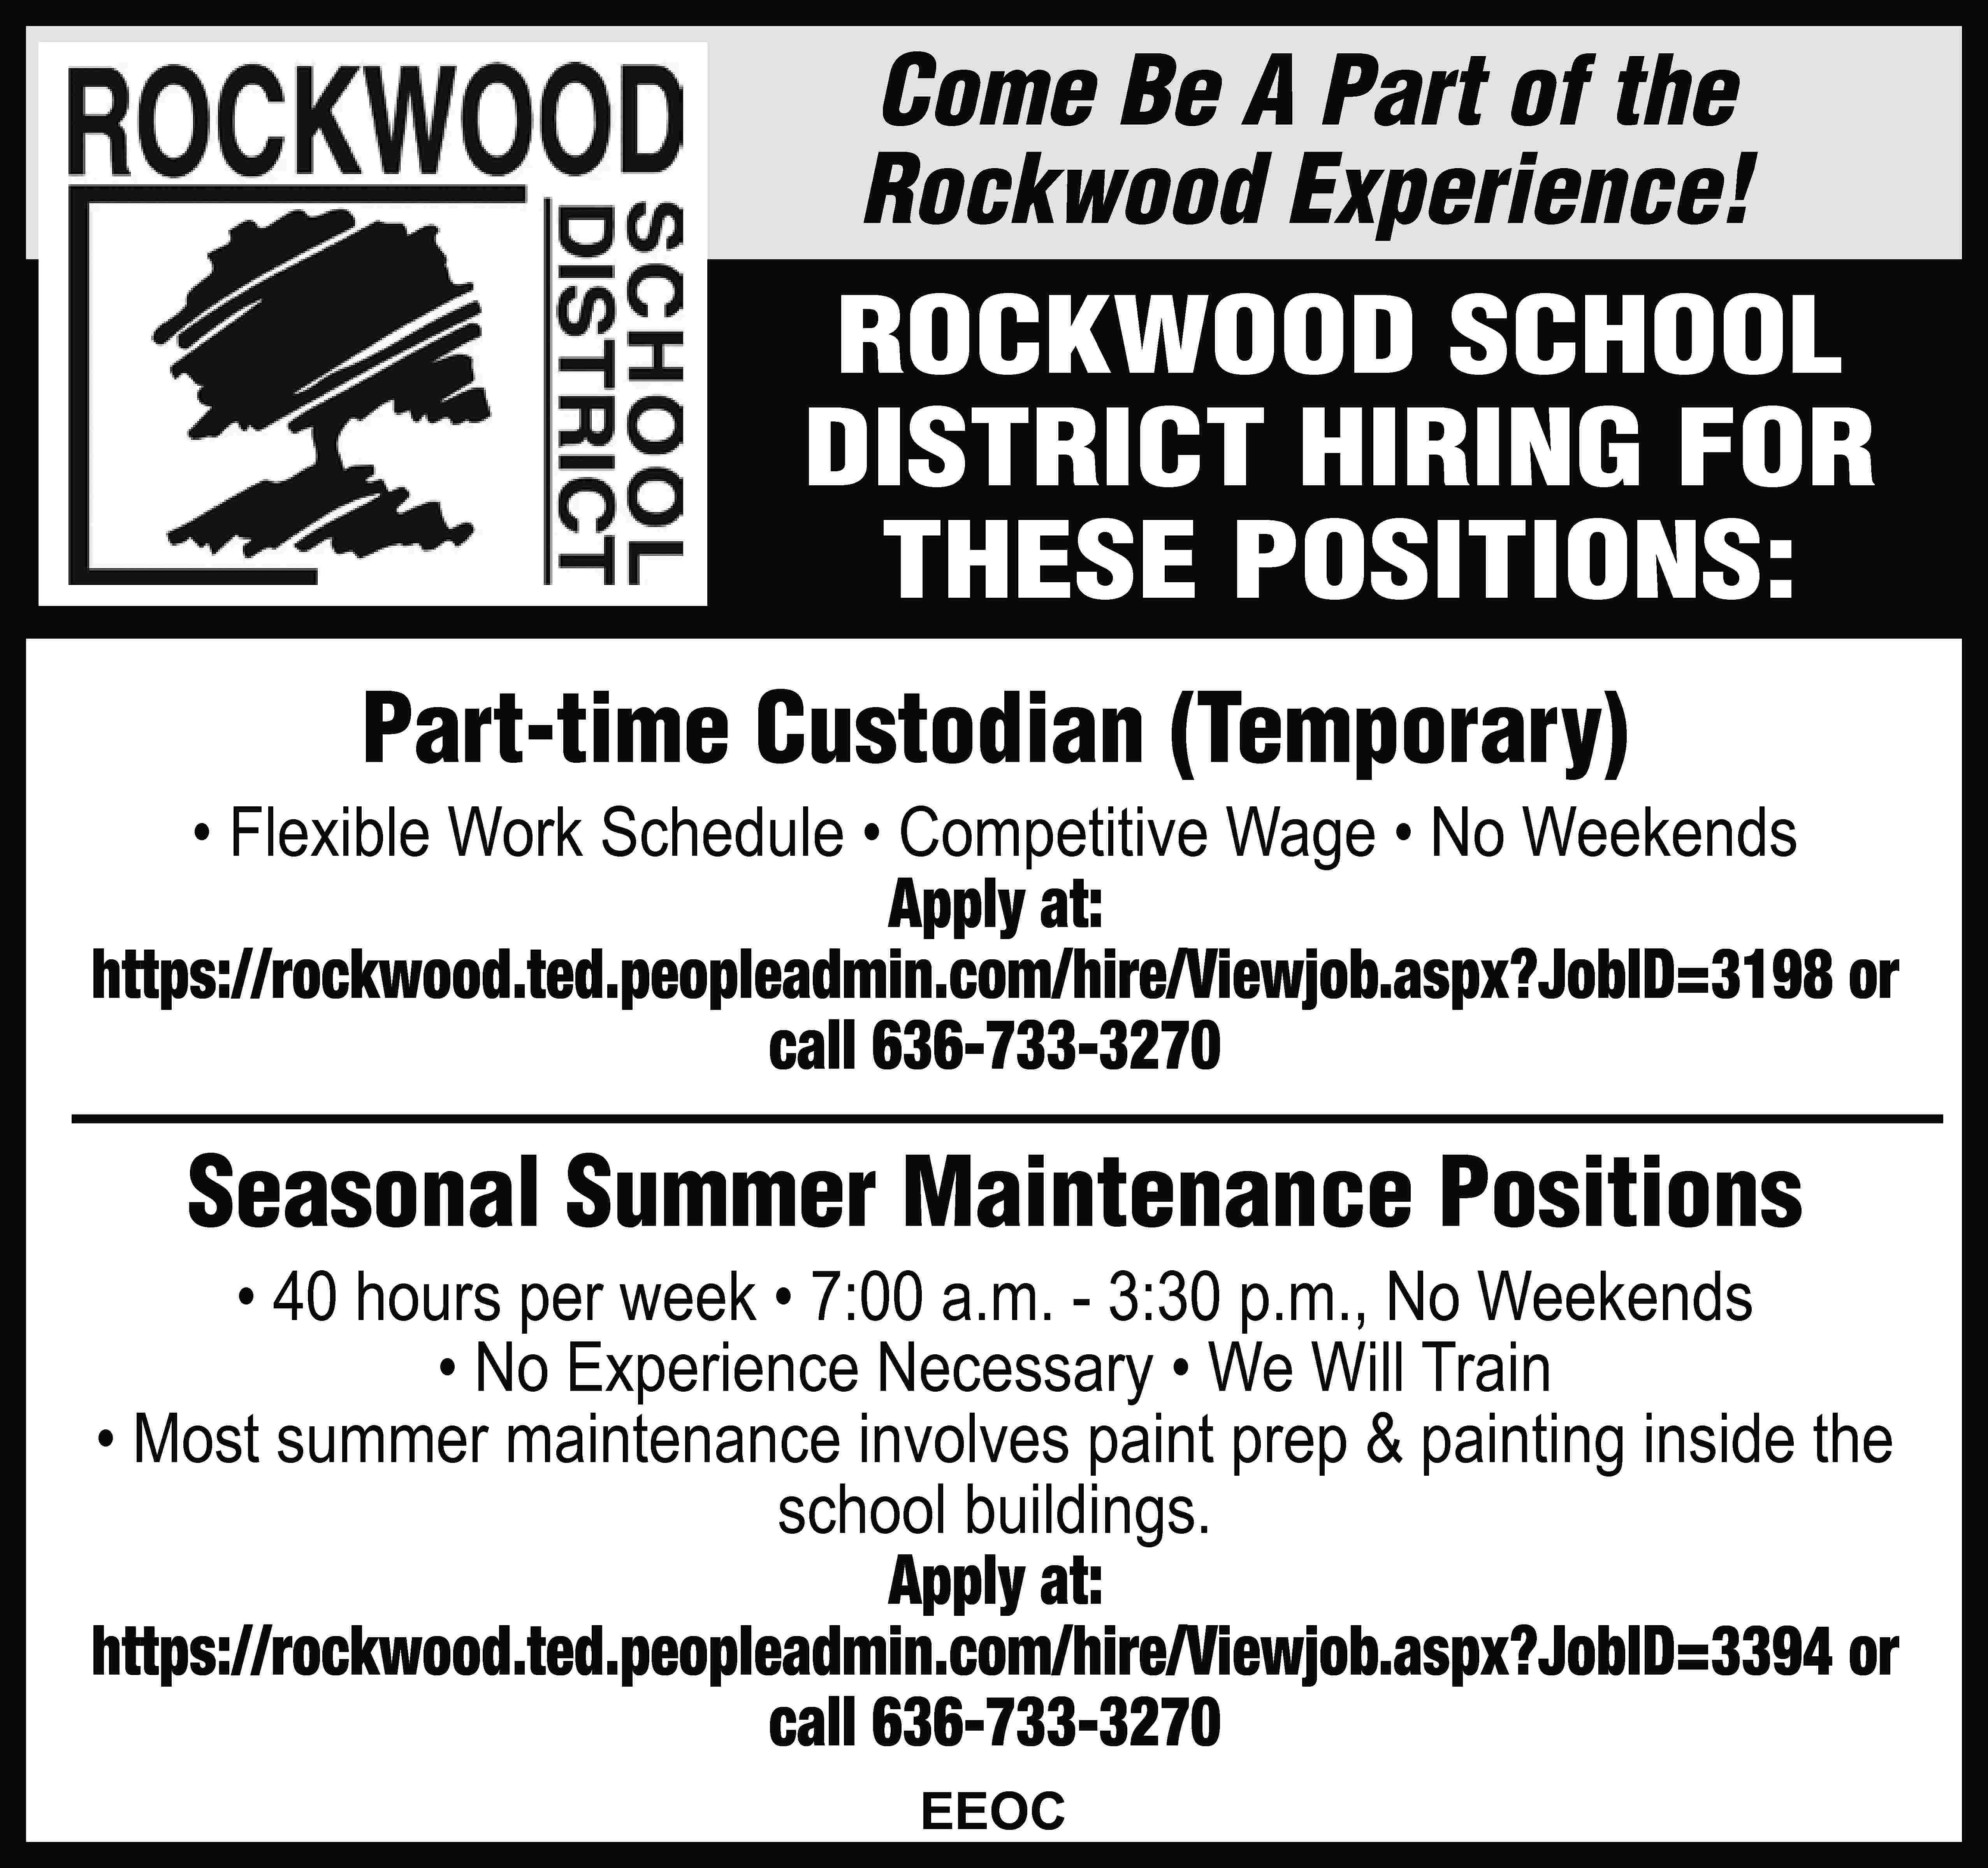 Come Be A Part of  Come Be A Part of the Rockwood Experience! ROCKWOOD SCHOOL DISTRICT HIRING FOR THESE POSITIONS: Part-time Custodian (Temporary) • Flexible Work Schedule • Competitive Wage • No Weekends Apply at: https://rockwood.ted.peopleadmin.com/hire/Viewjob.aspx?JobID=3198 or call 636-733-3270 Seasonal Summer Maintenance Positions • 40 hours per week • 7:00 a.m. - 3:30 p.m., No Weekends • No Experience Necessary • We Will Train • Most summer maintenance involves paint prep & painting inside the school buildings. Apply at: https://rockwood.ted.peopleadmin.com/hire/Viewjob.aspx?JobID=3394 or call 636-733-3270 EEOC